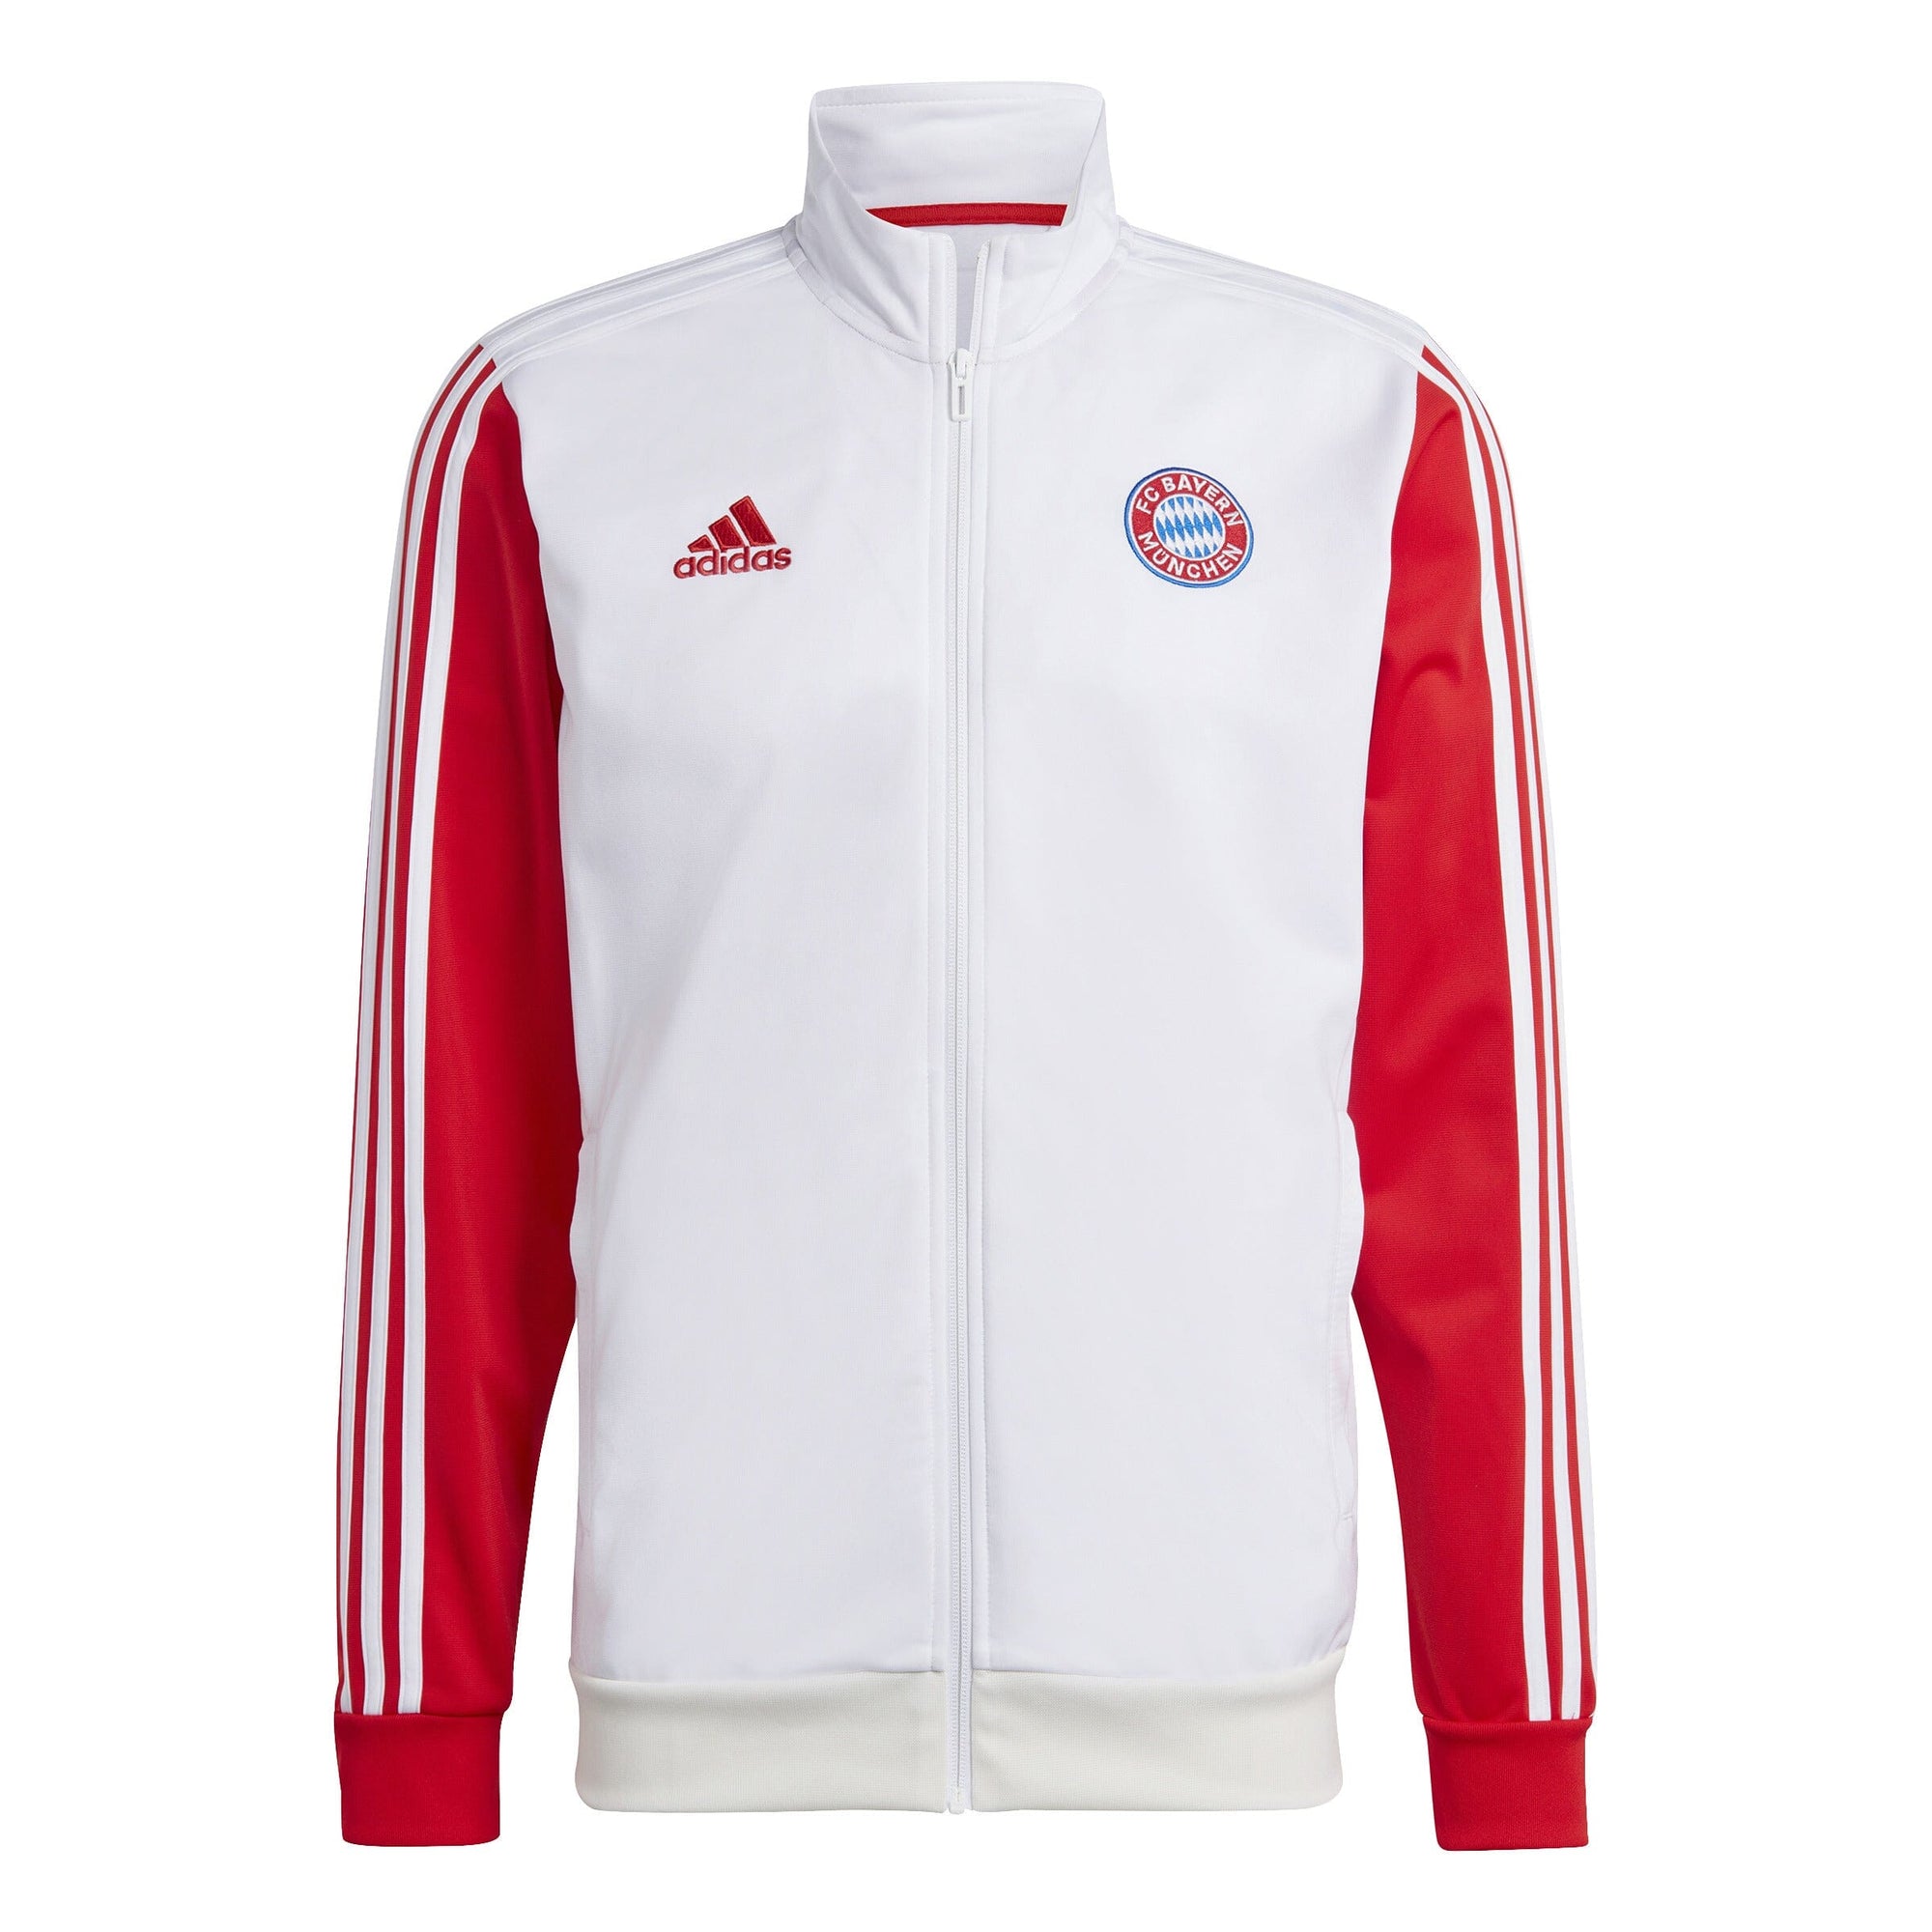 adidas Men's FC Bayern 23/24 DNA Track Top | HY3282 Track Jacket Adidas Adult Small White / Red 